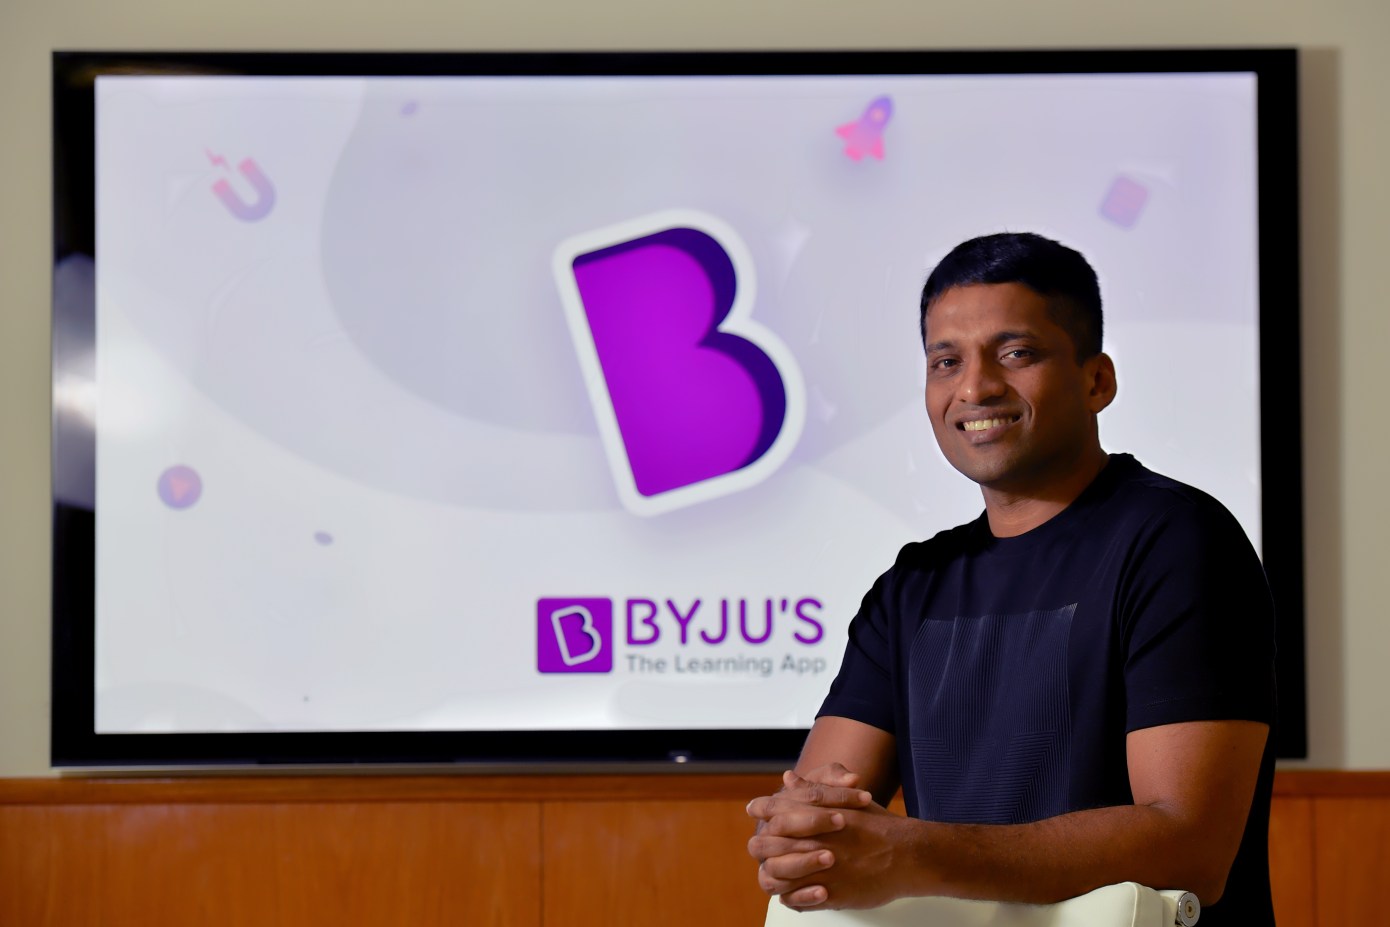 BYJU has given its statement that all affected employees would get "a significant and progressive exit payment" due to the company's decision to cease operations in Thiruvananthapuram, Kerala. Earlier, some BYJU employees claimed that the company was pressuring more than 170 staff to resign at a meeting with Kerala's labor minister. In the meantime, BYJU'S said that reorganisation hurt 140 employees.